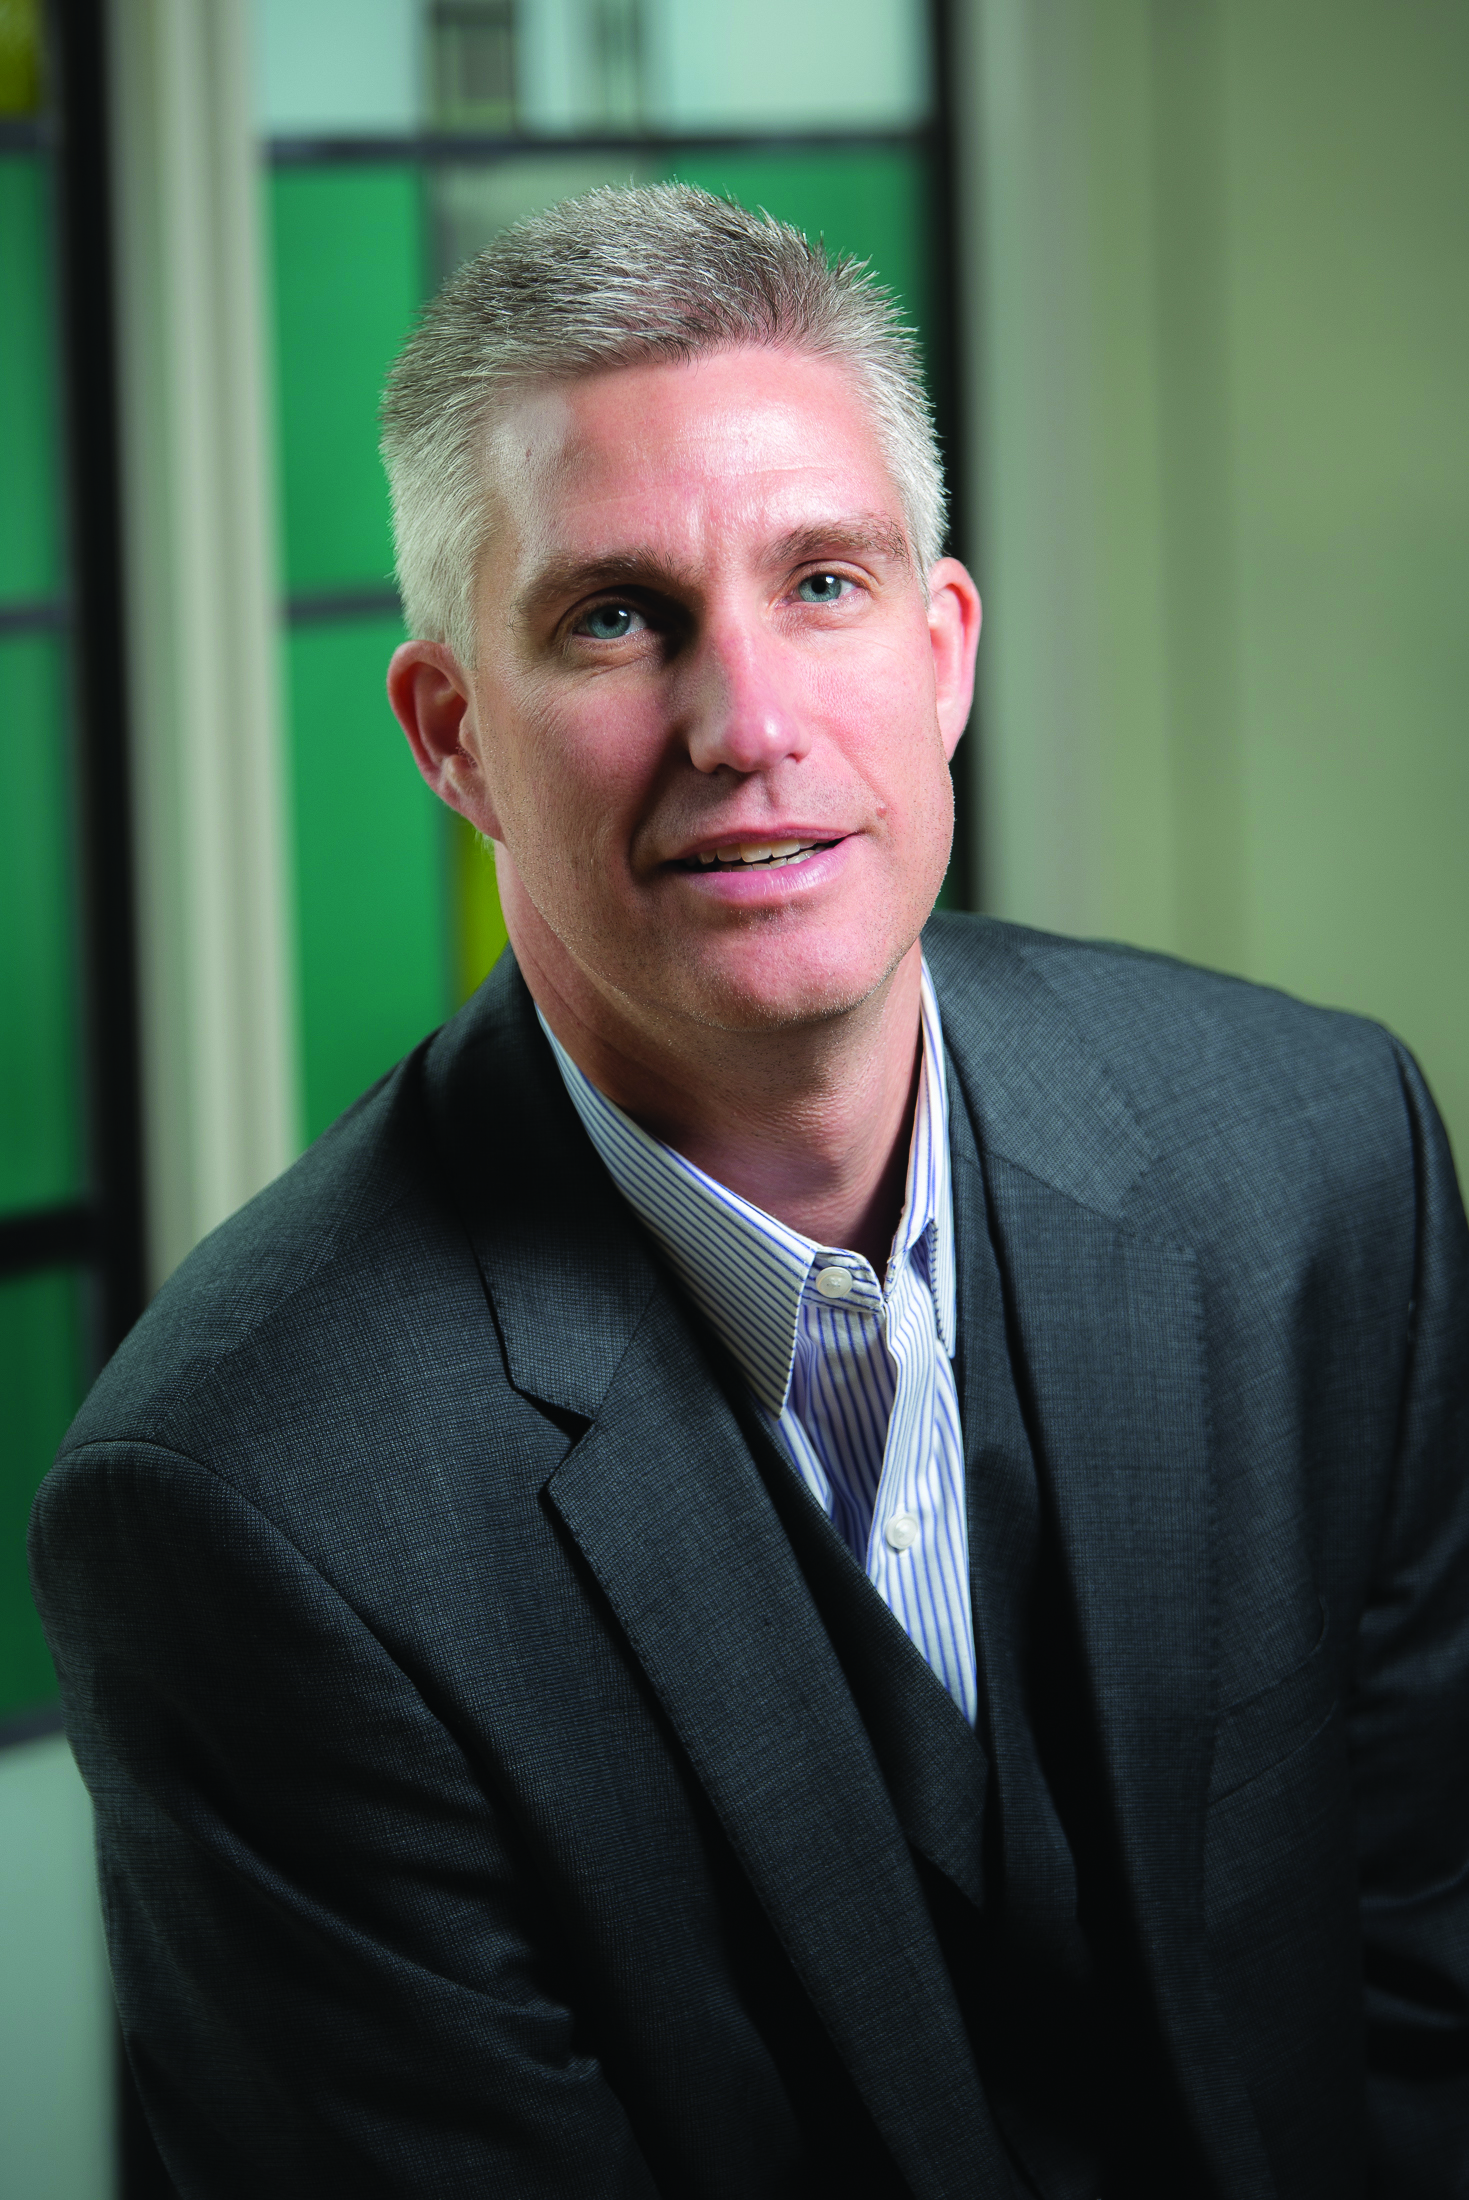 David Souder, associate professor of management and academic director for the Executive MBA Program